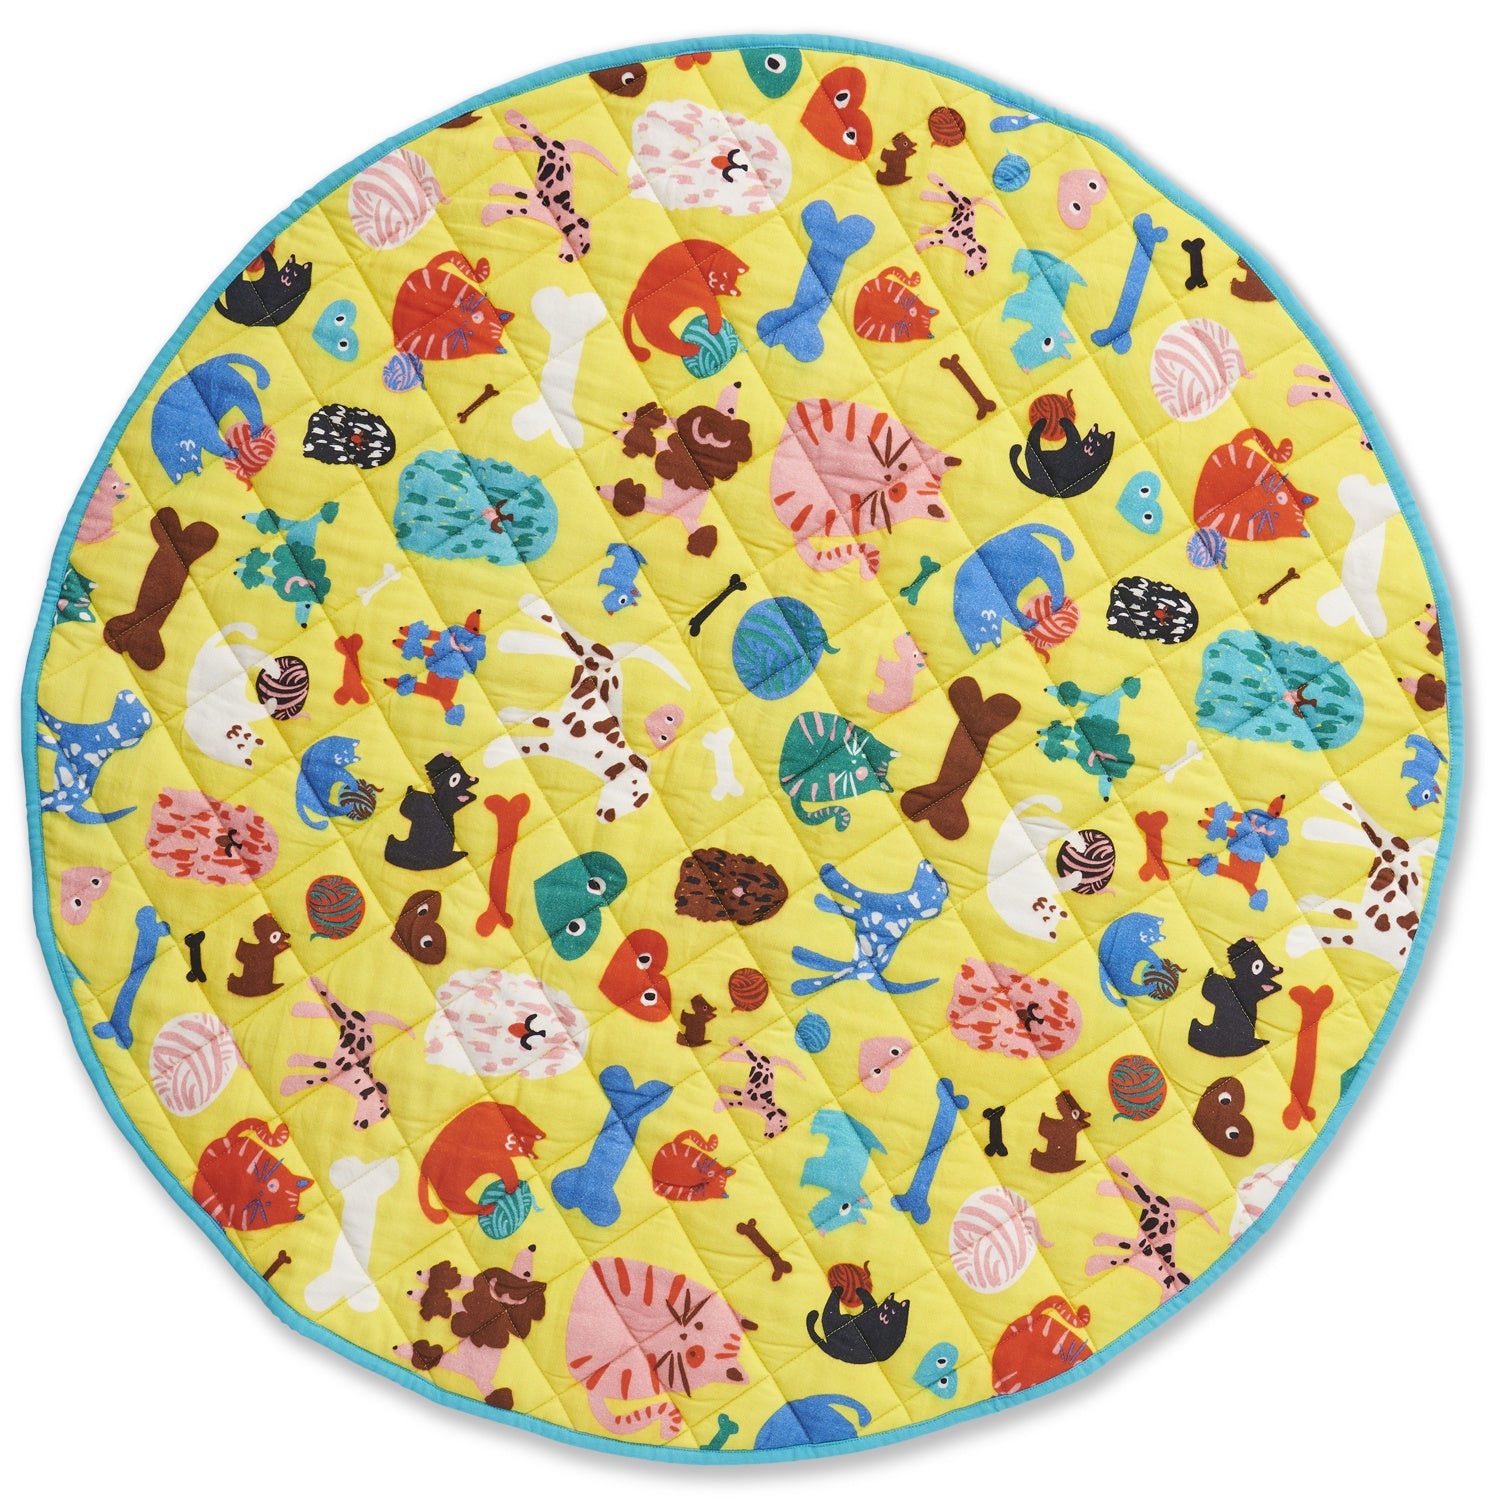 Quilted Play Mat - Cats & Dogs